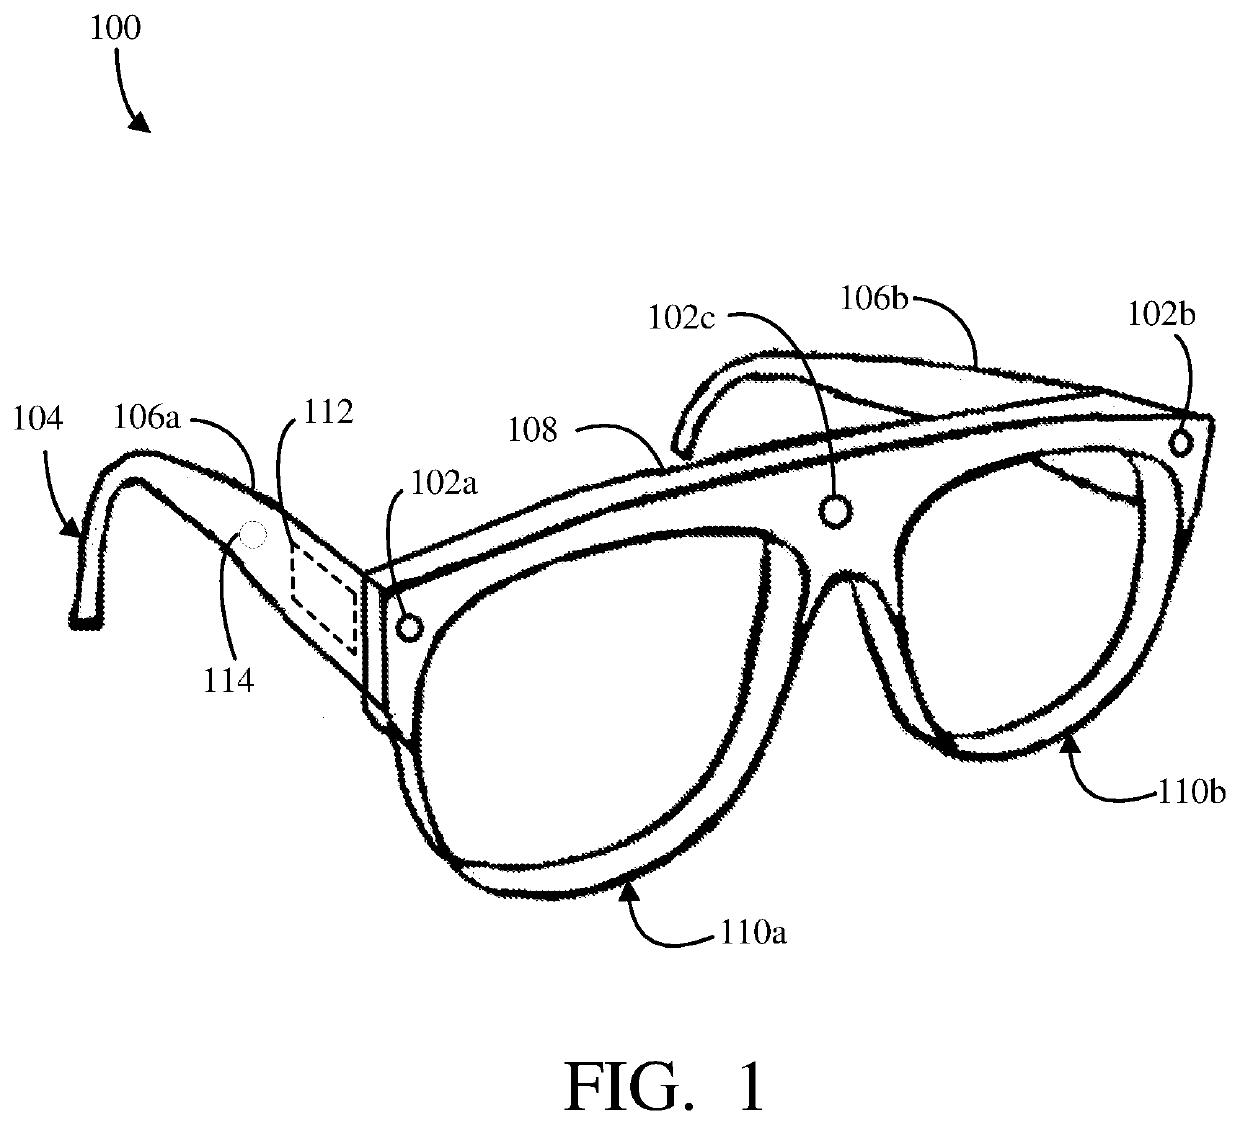 Eyeglasses And Methods Of Inactivating A Virus With Ultraviolet Light